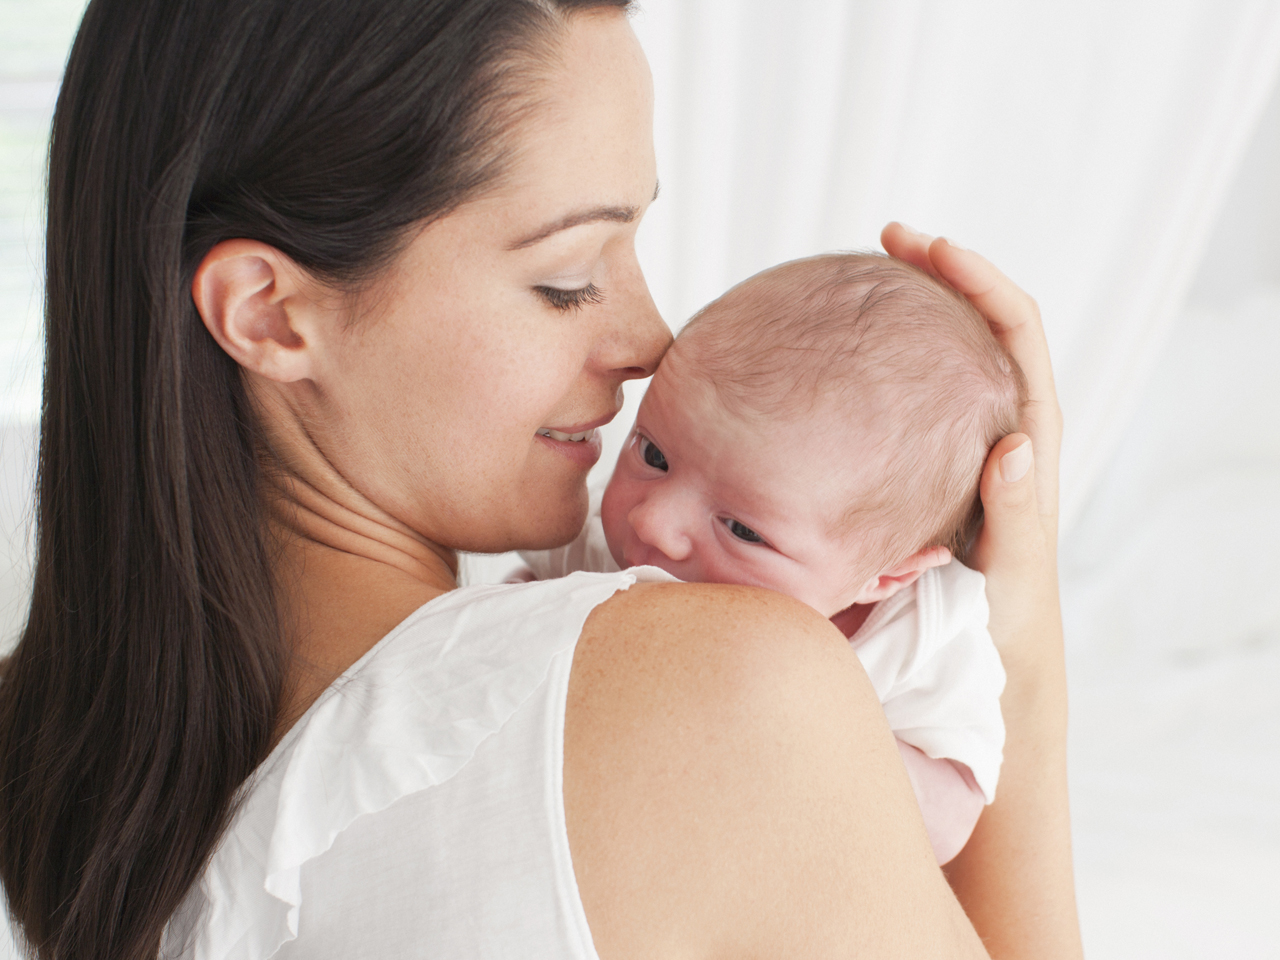 Study finds it's good to hold your baby